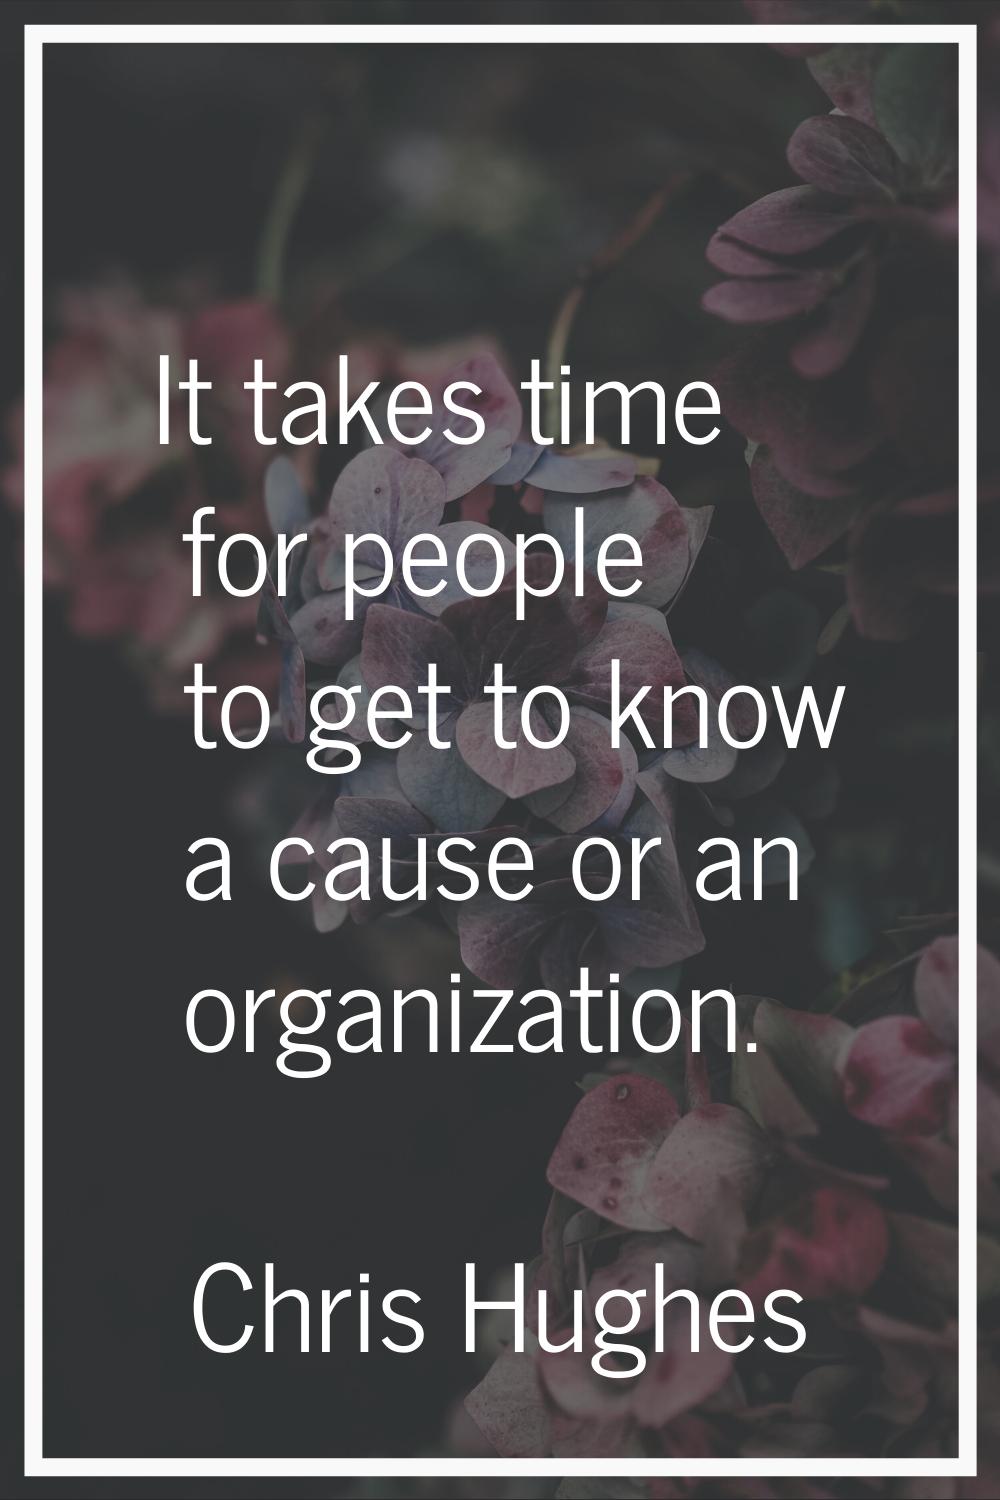 It takes time for people to get to know a cause or an organization.